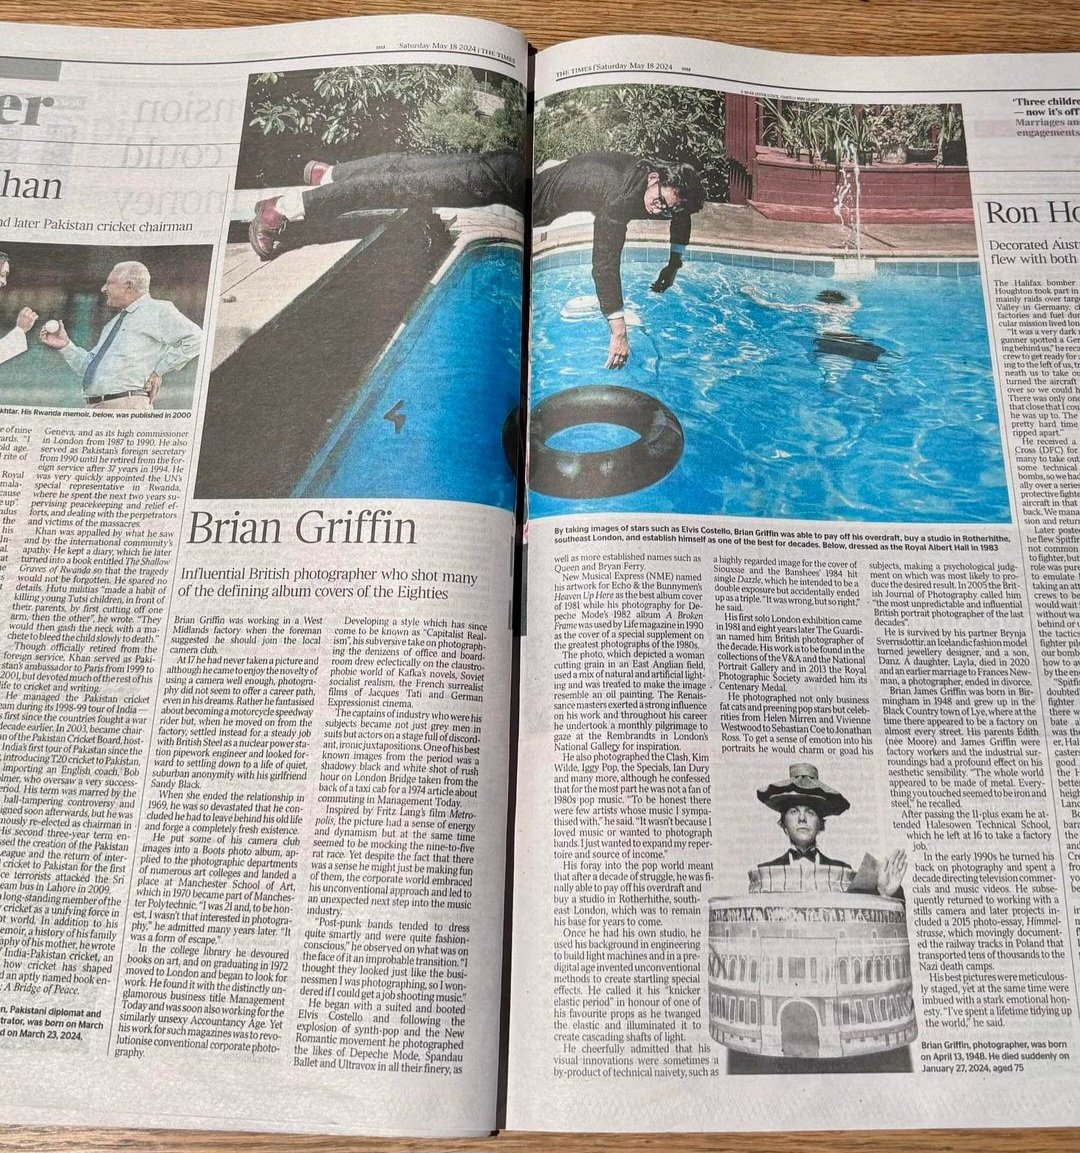 Brian Griffin obituary: photographer who shot defining album covers of the Eighties
Son of factory workers collaborated with Elvis Costello, the Clash, Depeche Mode and Queen, and was considered the best of the decade
The Times
Saturday May 18 2024
thetimes.co.uk/article/brian-…